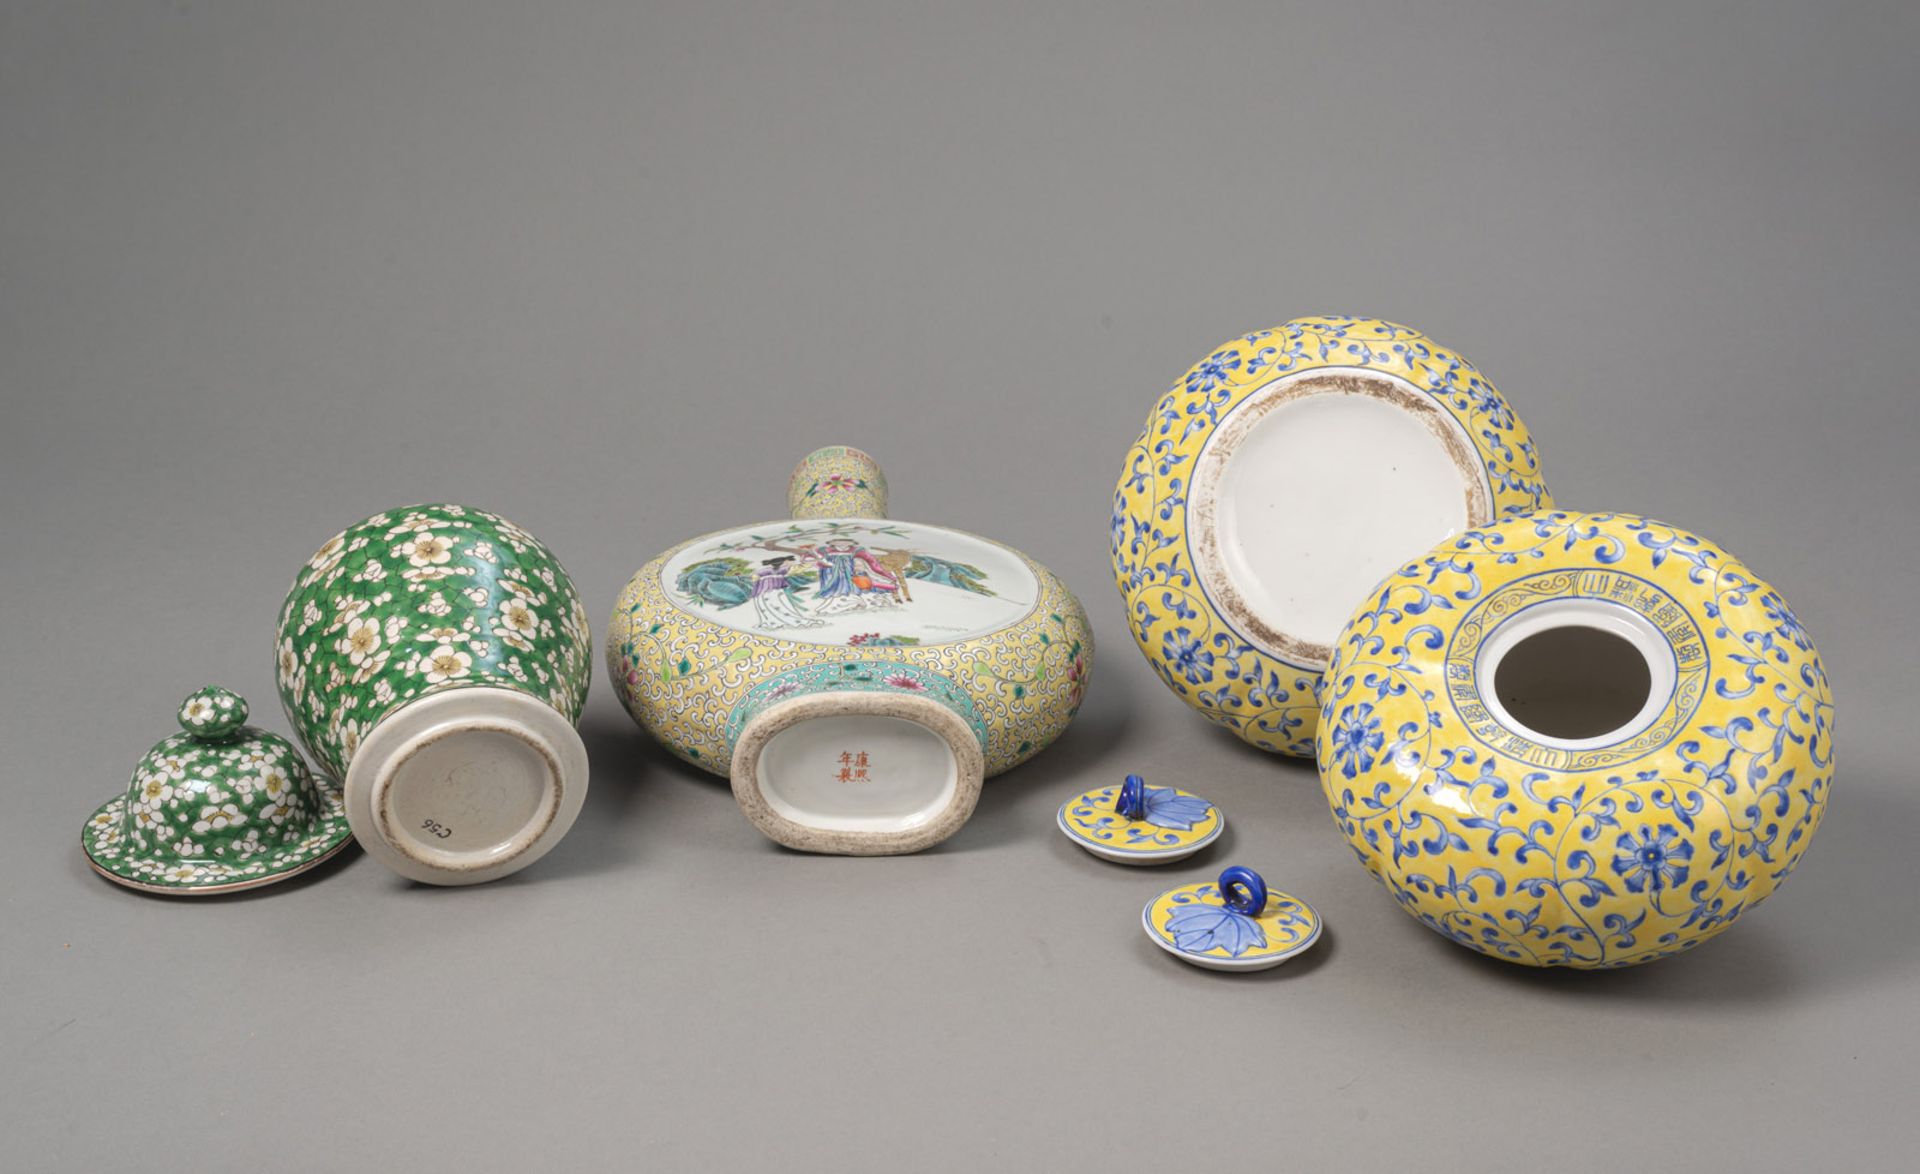 LOT OF PORCELAIN: TWO YELLOW-GROUND GOURD-SHAPED COVERED VESSELS, A PILGRIM BOTTLE, A GREEN-GROUND - Image 3 of 3